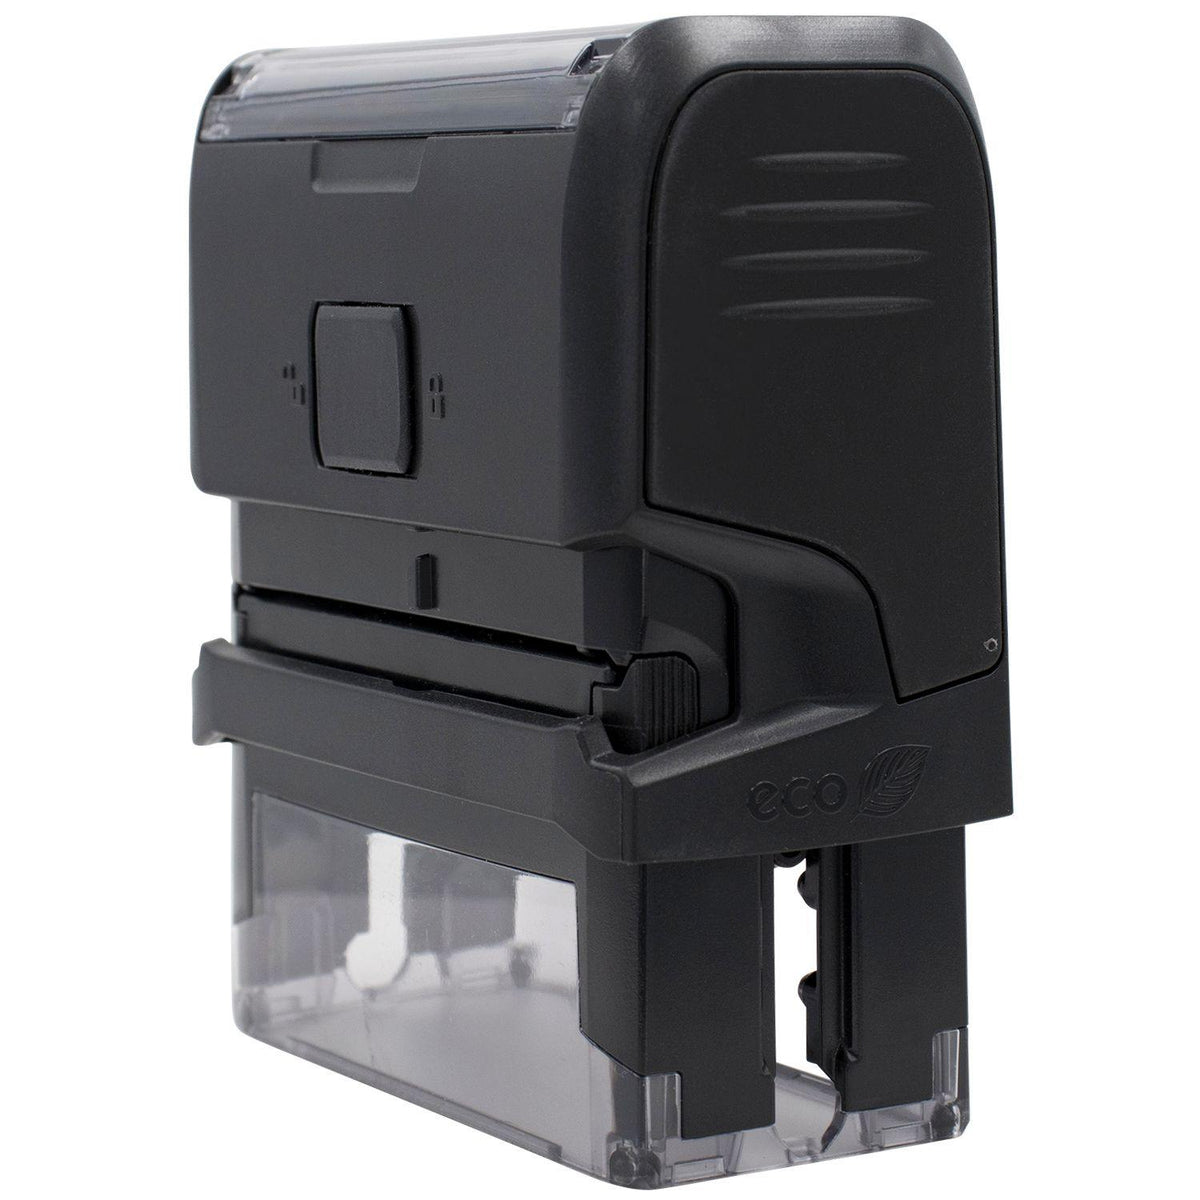 Side View of Large Self-Inking Bold Banco Stamp at an Angle